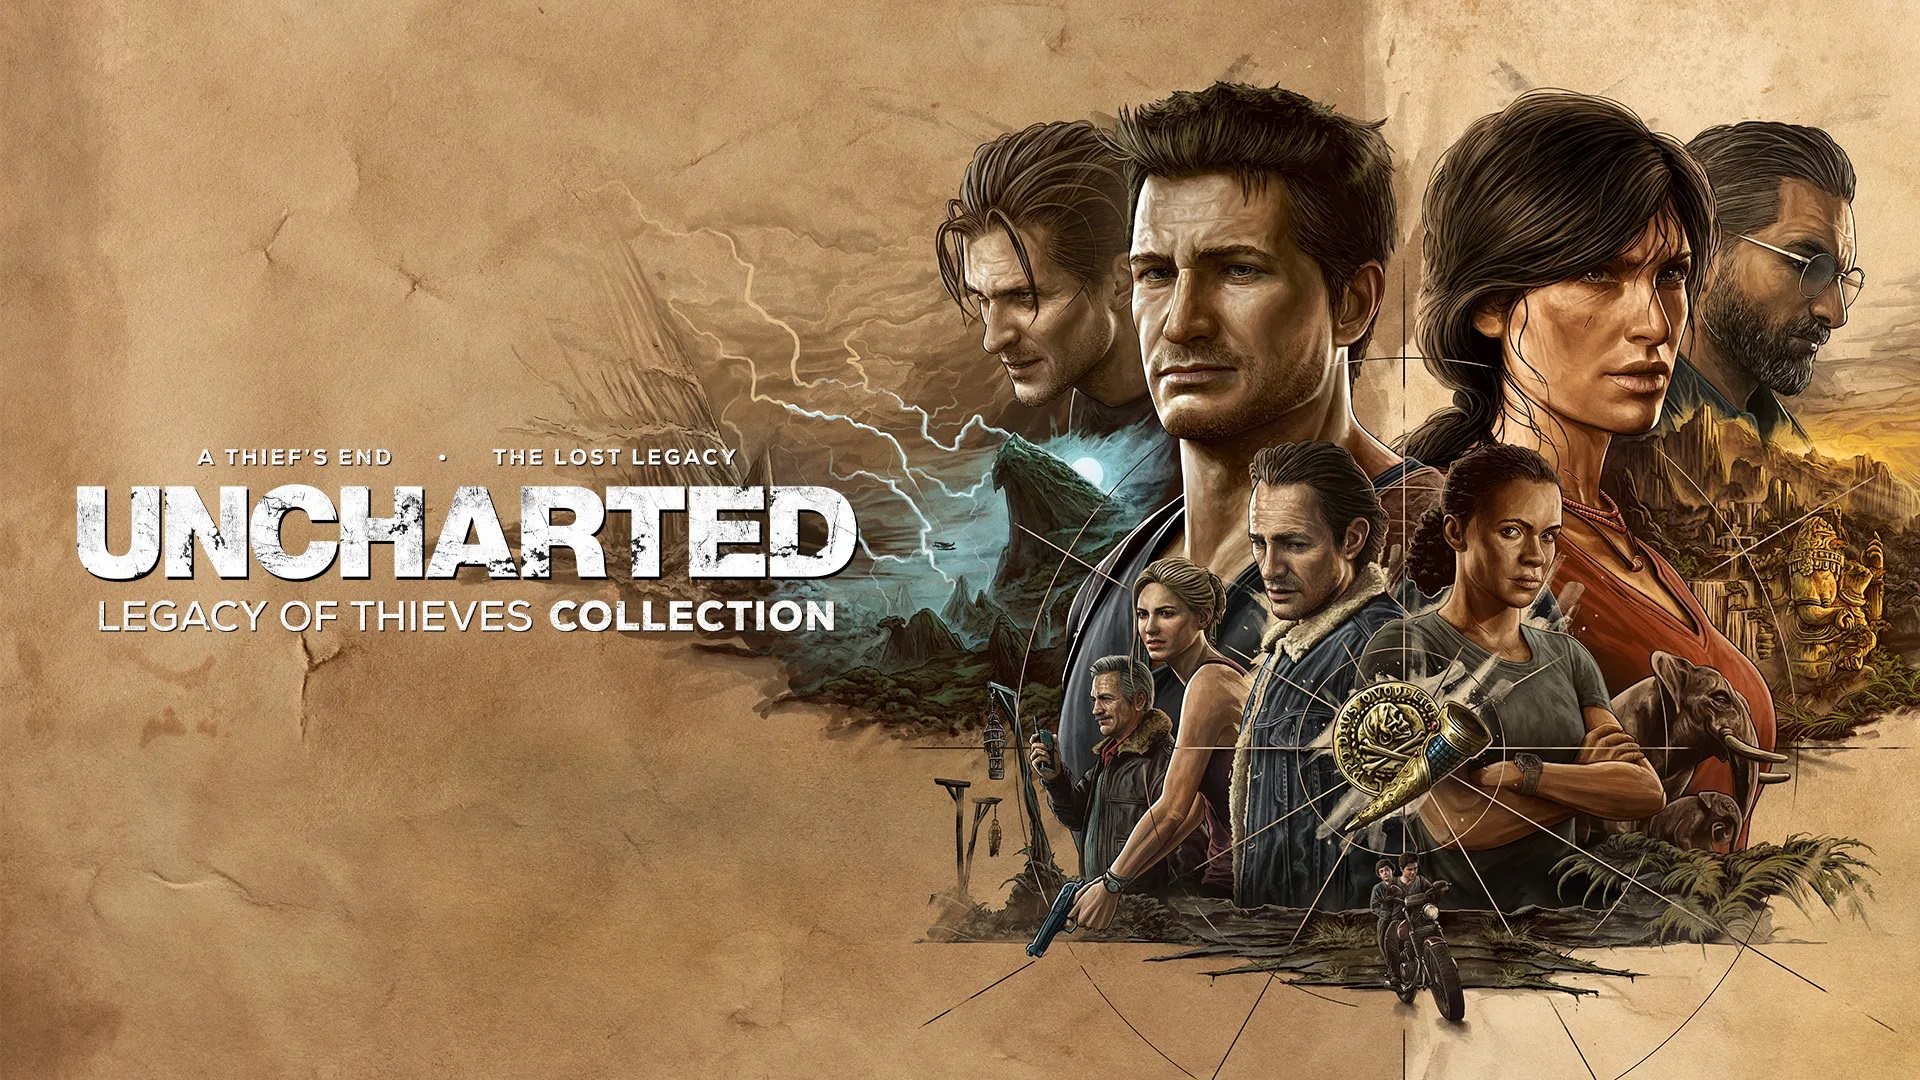 Uncharted Legacy of Thieves Collection pc org 17 - خرید بازی اورجینال UNCHARTED: Legacy of Thieves Collection برای PC